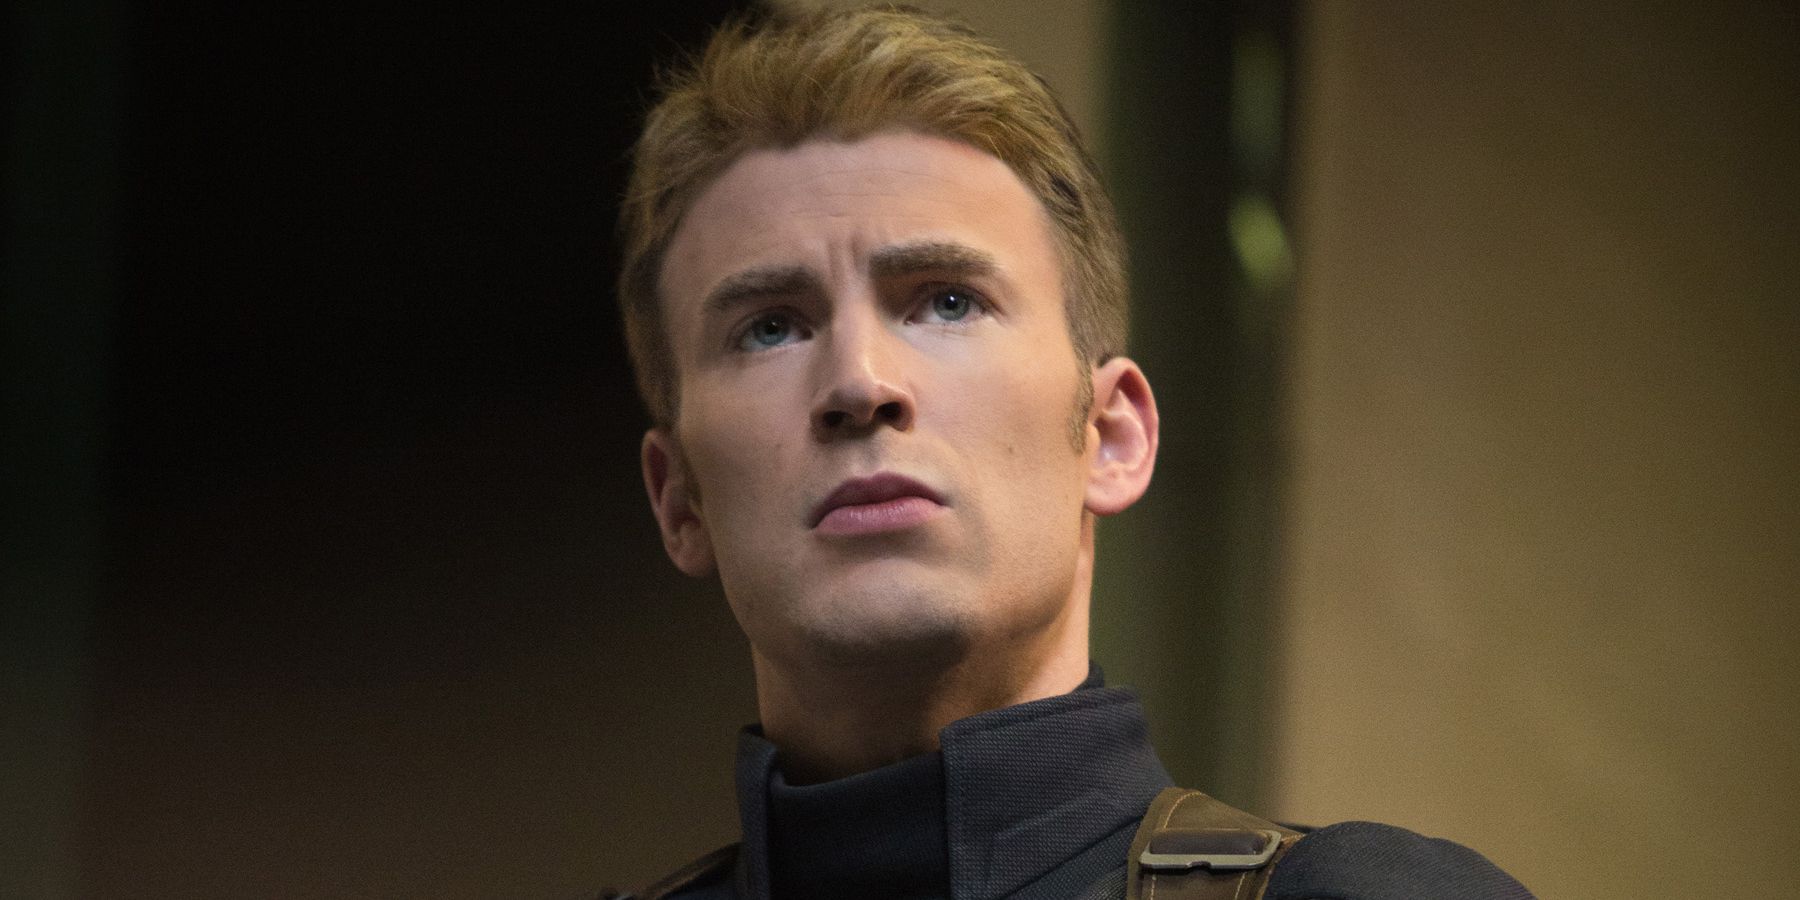 Steve Rogers looking serious in Captain America: The Winter Soldier.